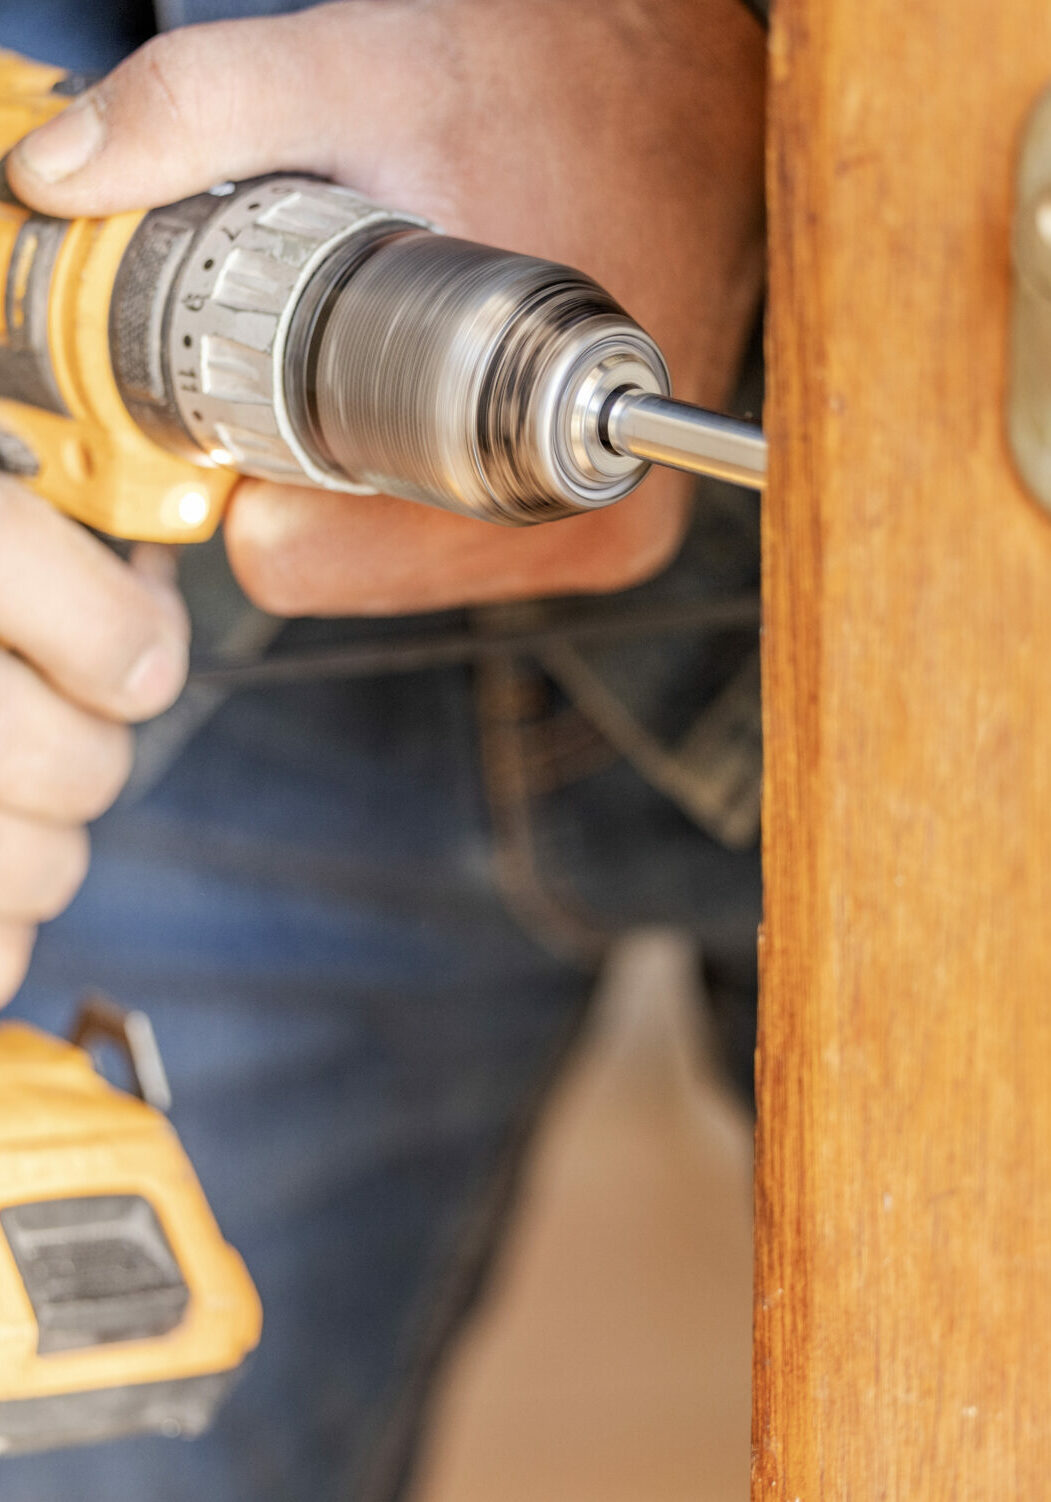 Locksmith hands, maintenance and handyman with construction and fixing, change door locks with tool.